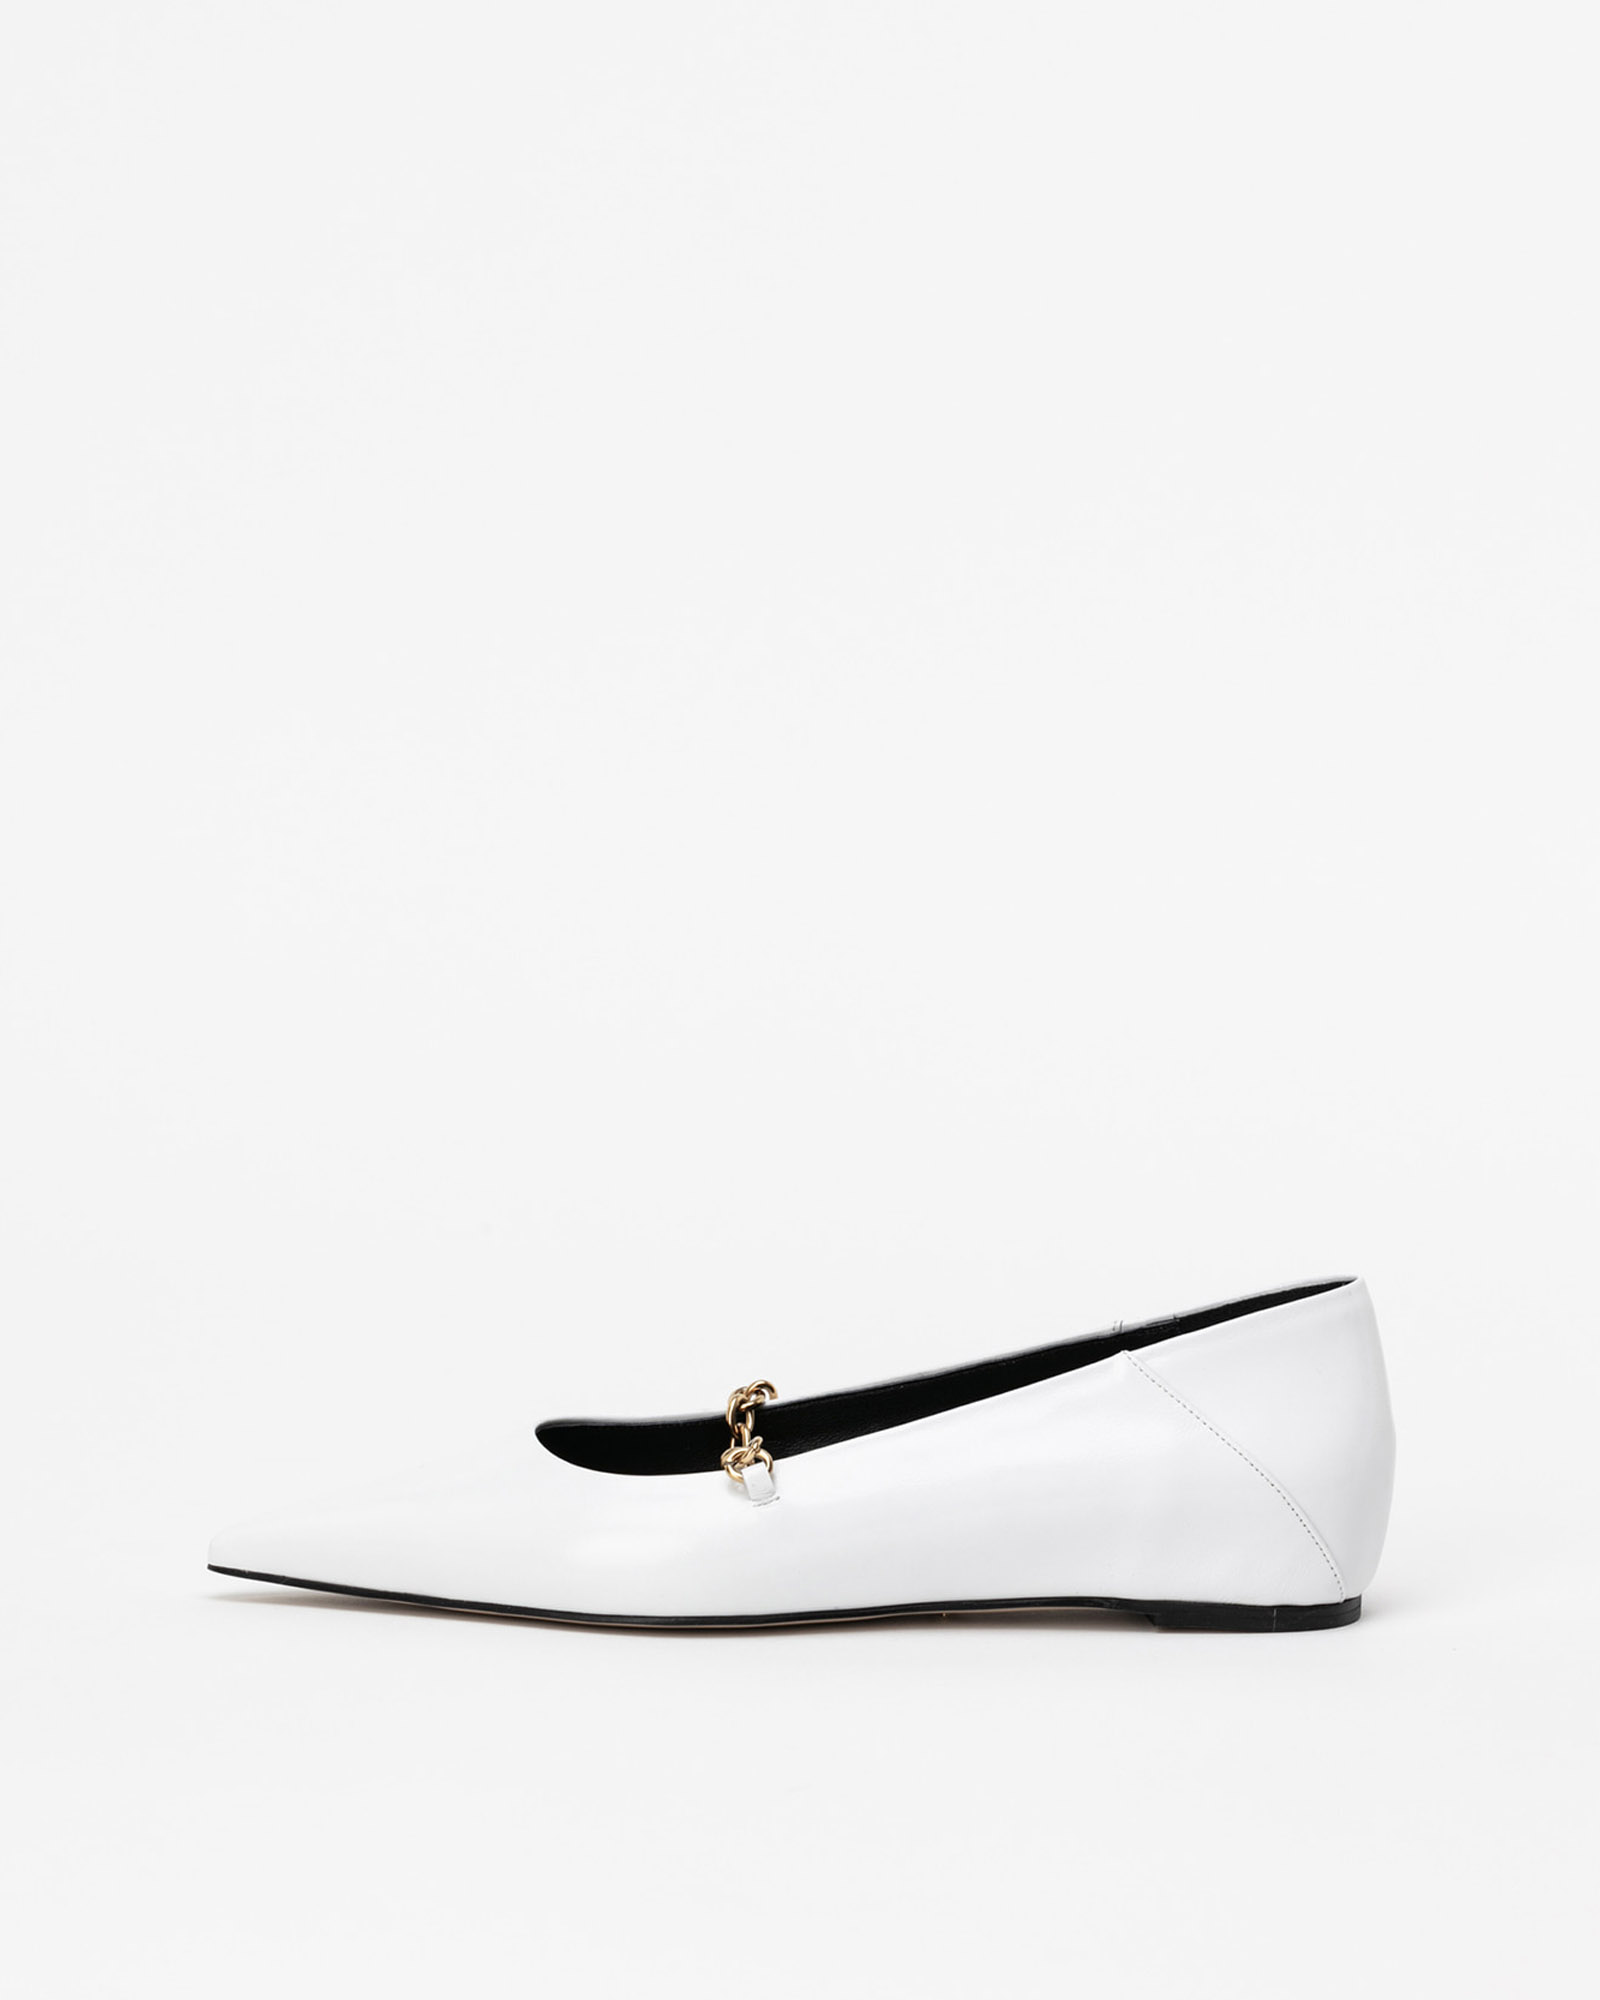 Chateau Chained Flat Shoes in White Textured Patent